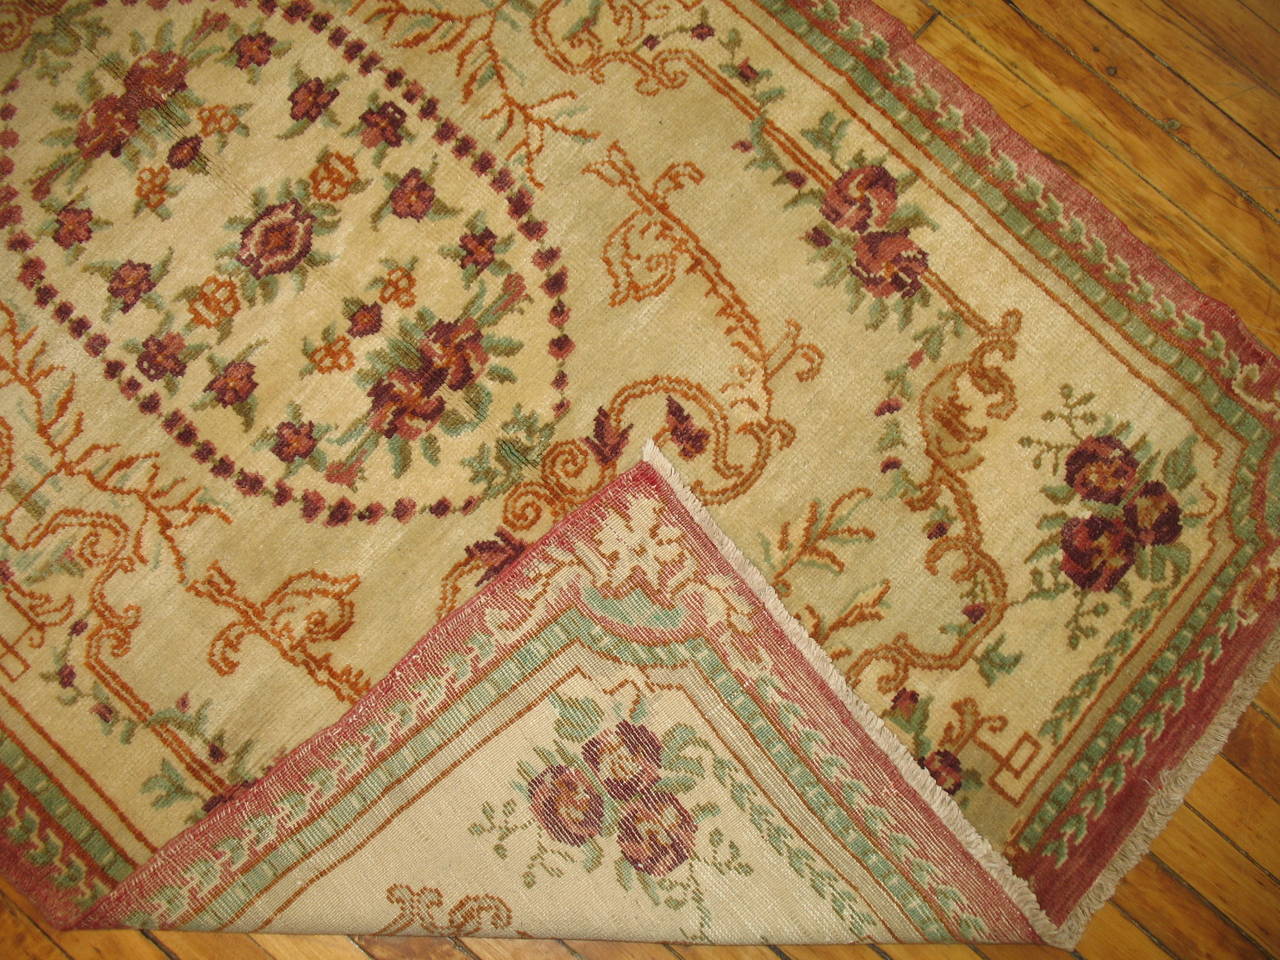 Exquisite Turkish ghiordes weave. Ivory field with splashes of raspberry and celadon green.